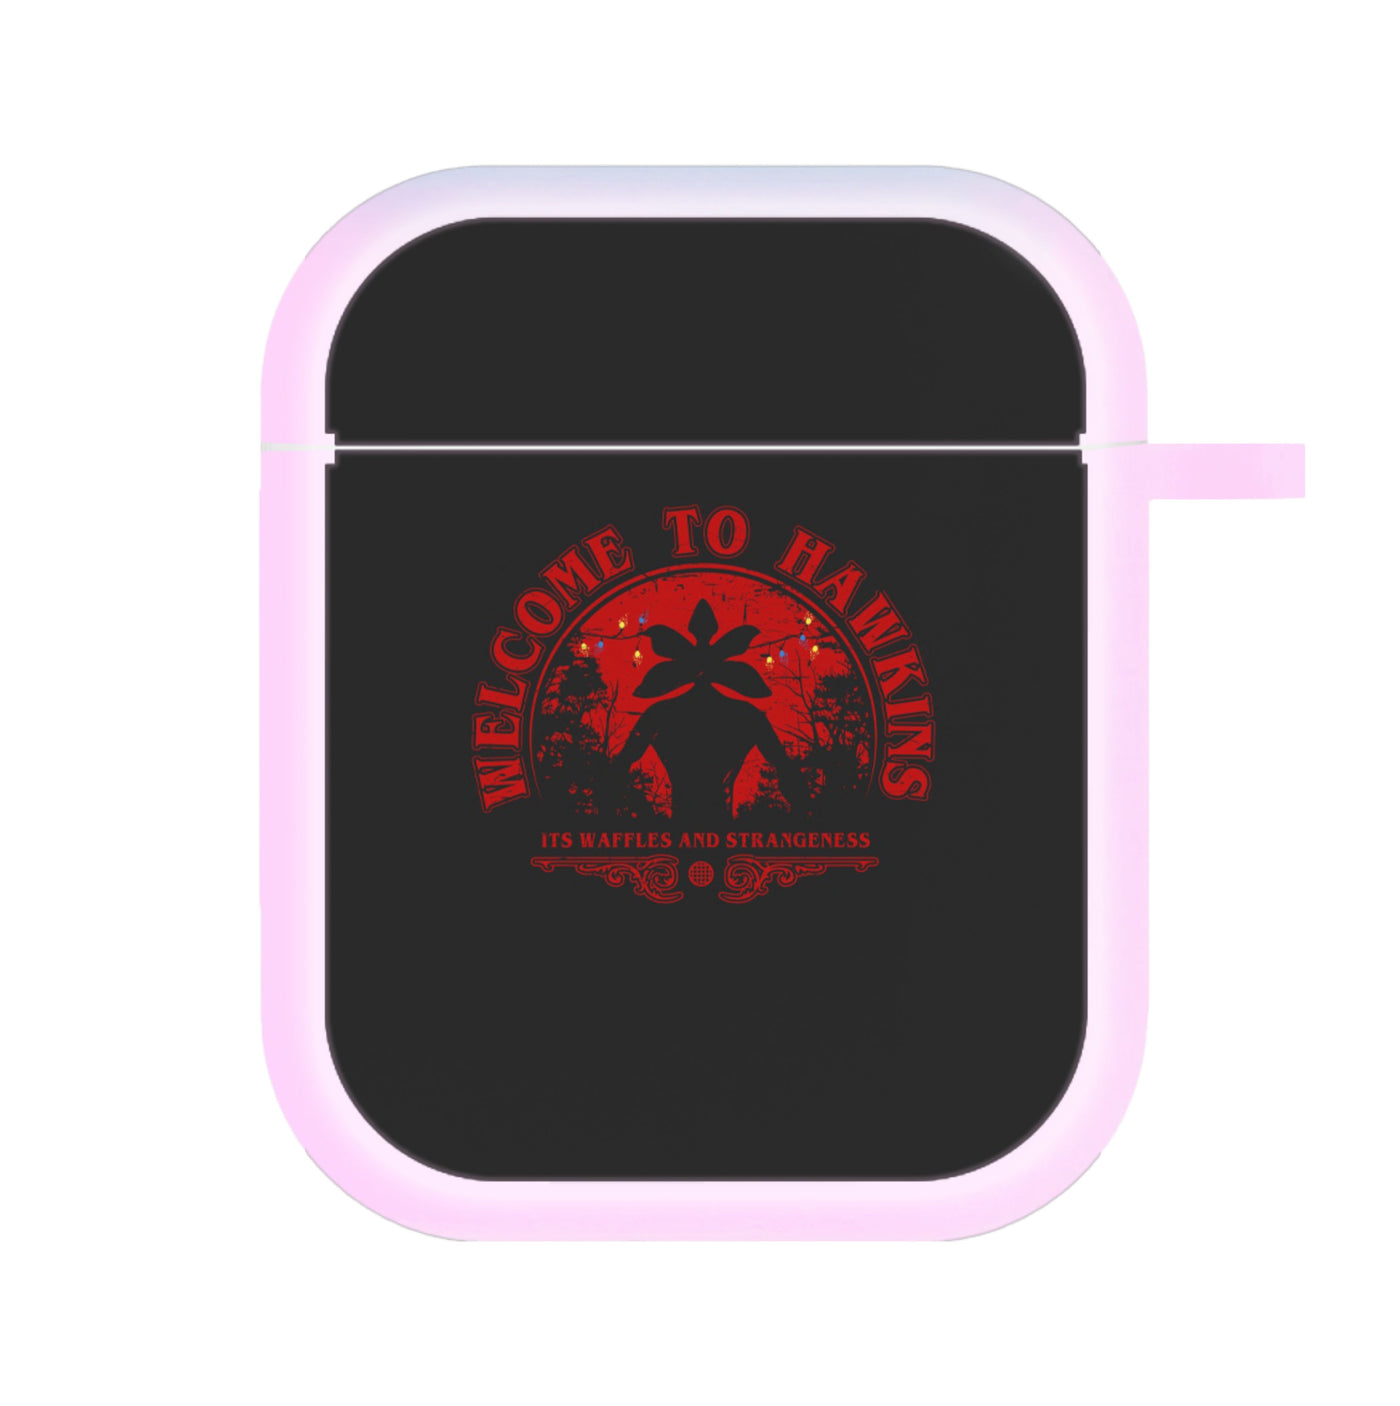 Welcome To Hawkings - Stranger Things AirPods Case